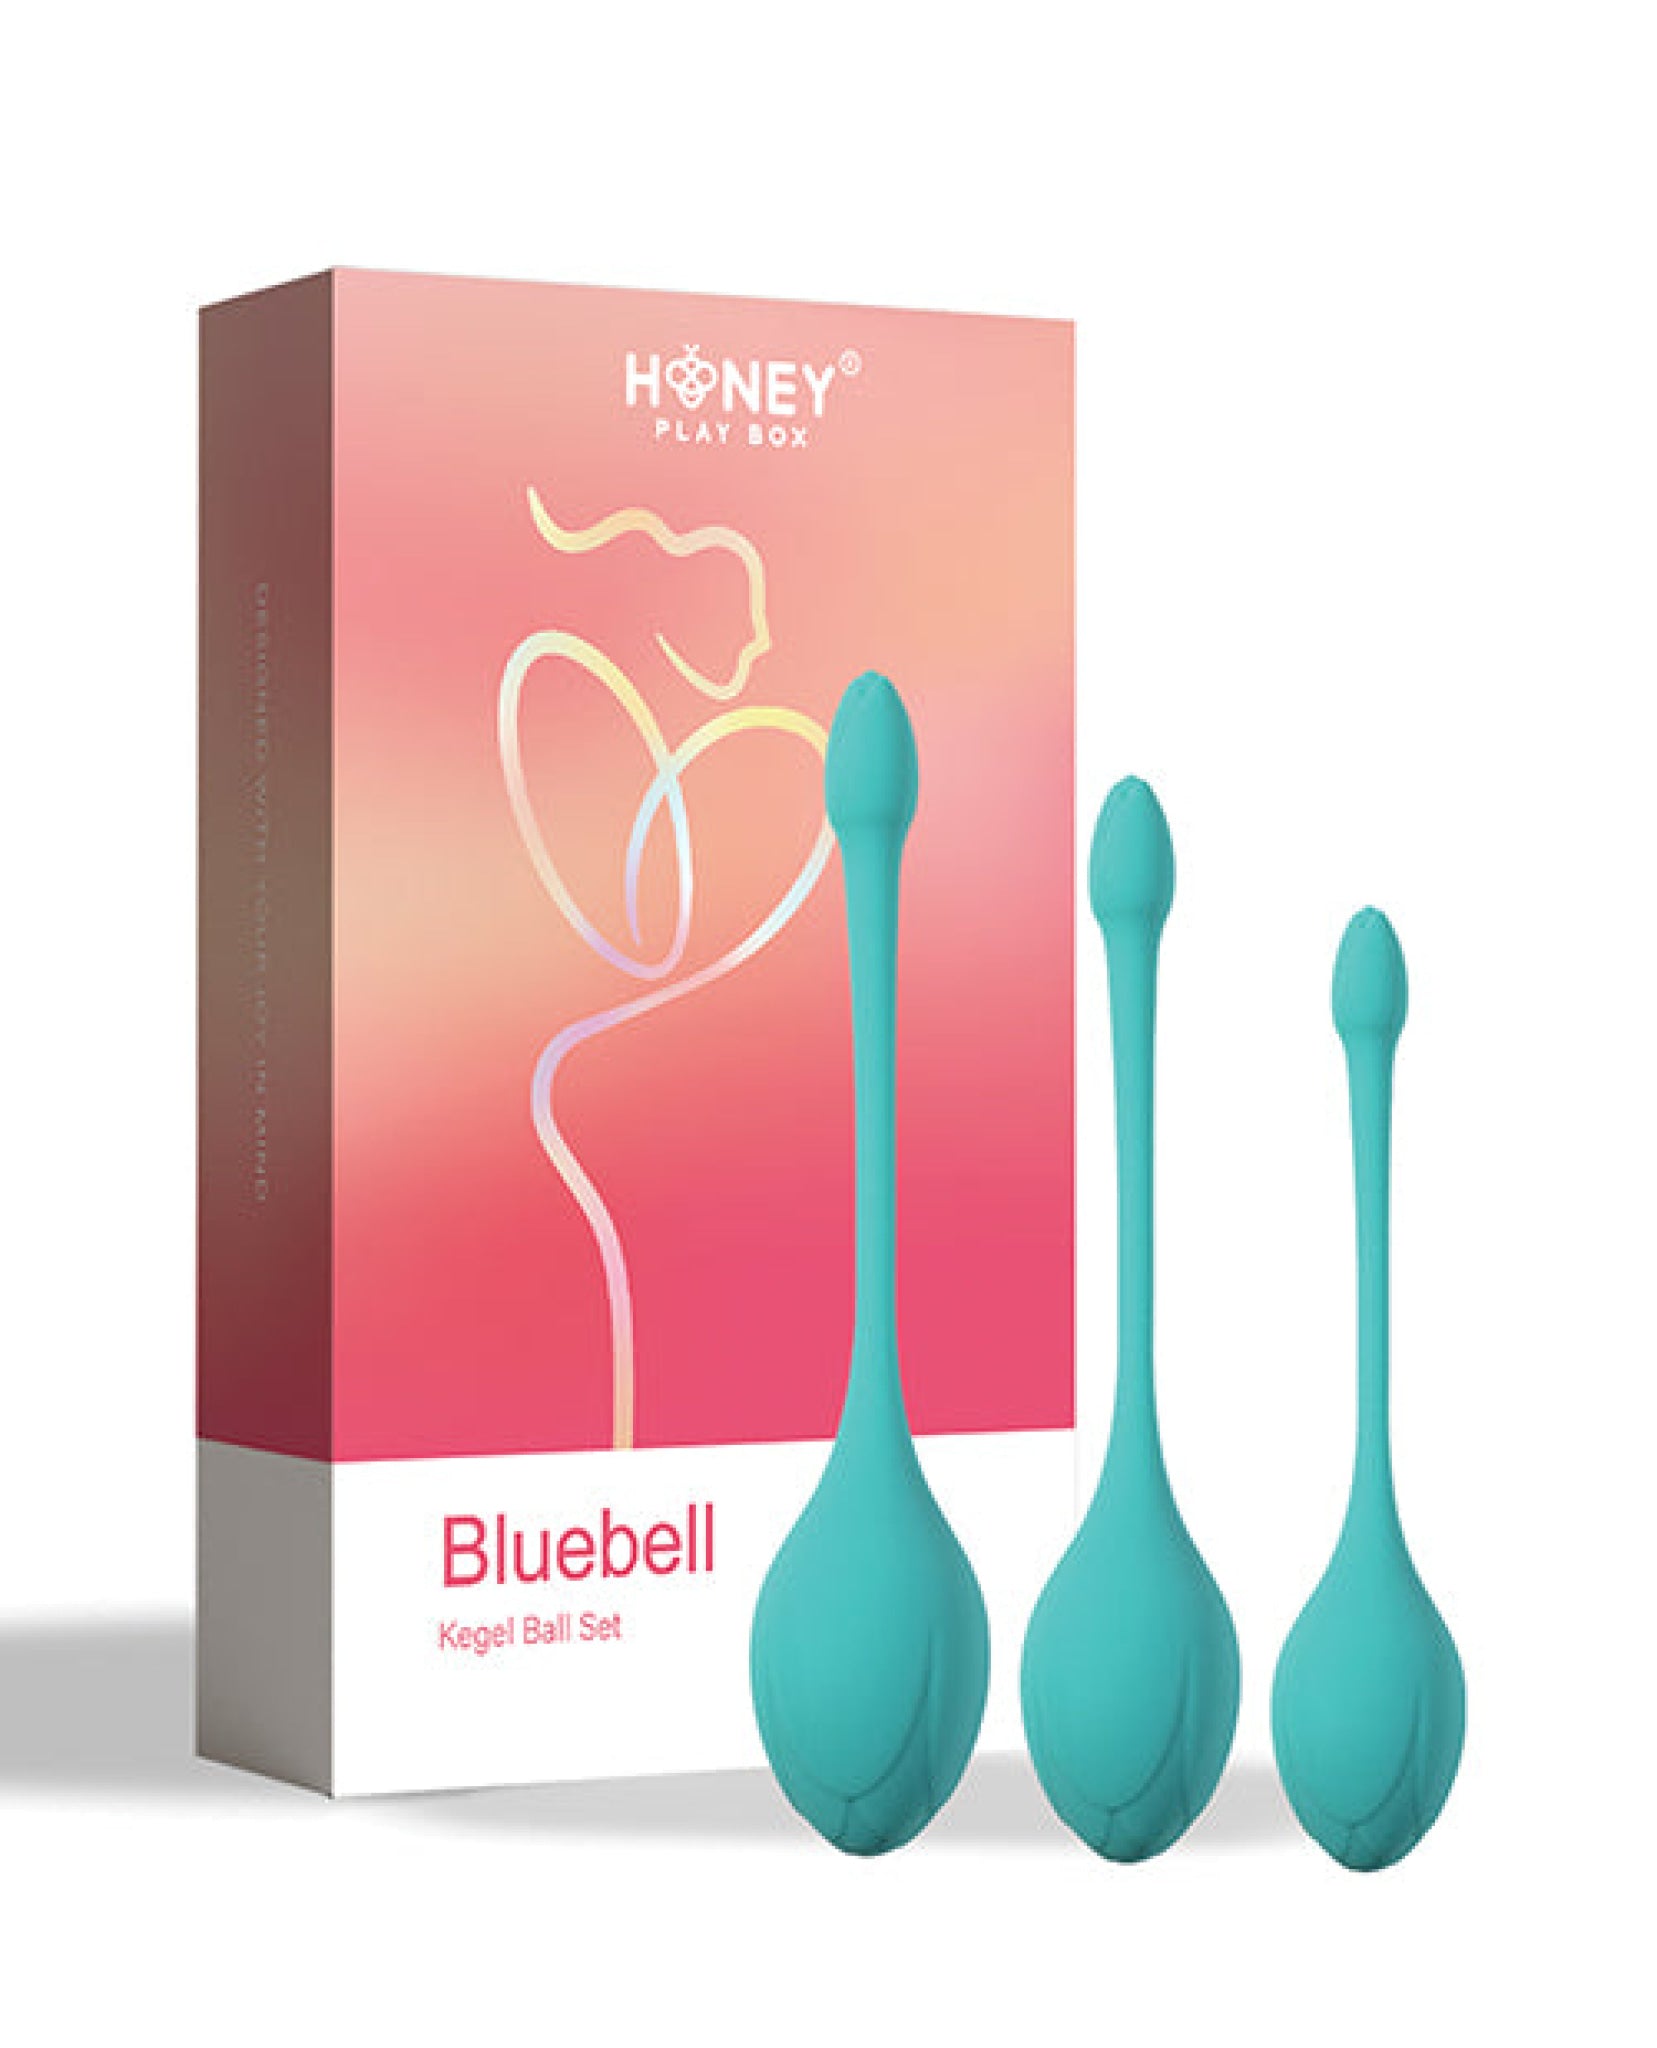 Bluebell Floral 3 Size & Weight Kegel Ball Exercise Set - Blue Uc Global Trade INChoney Play B